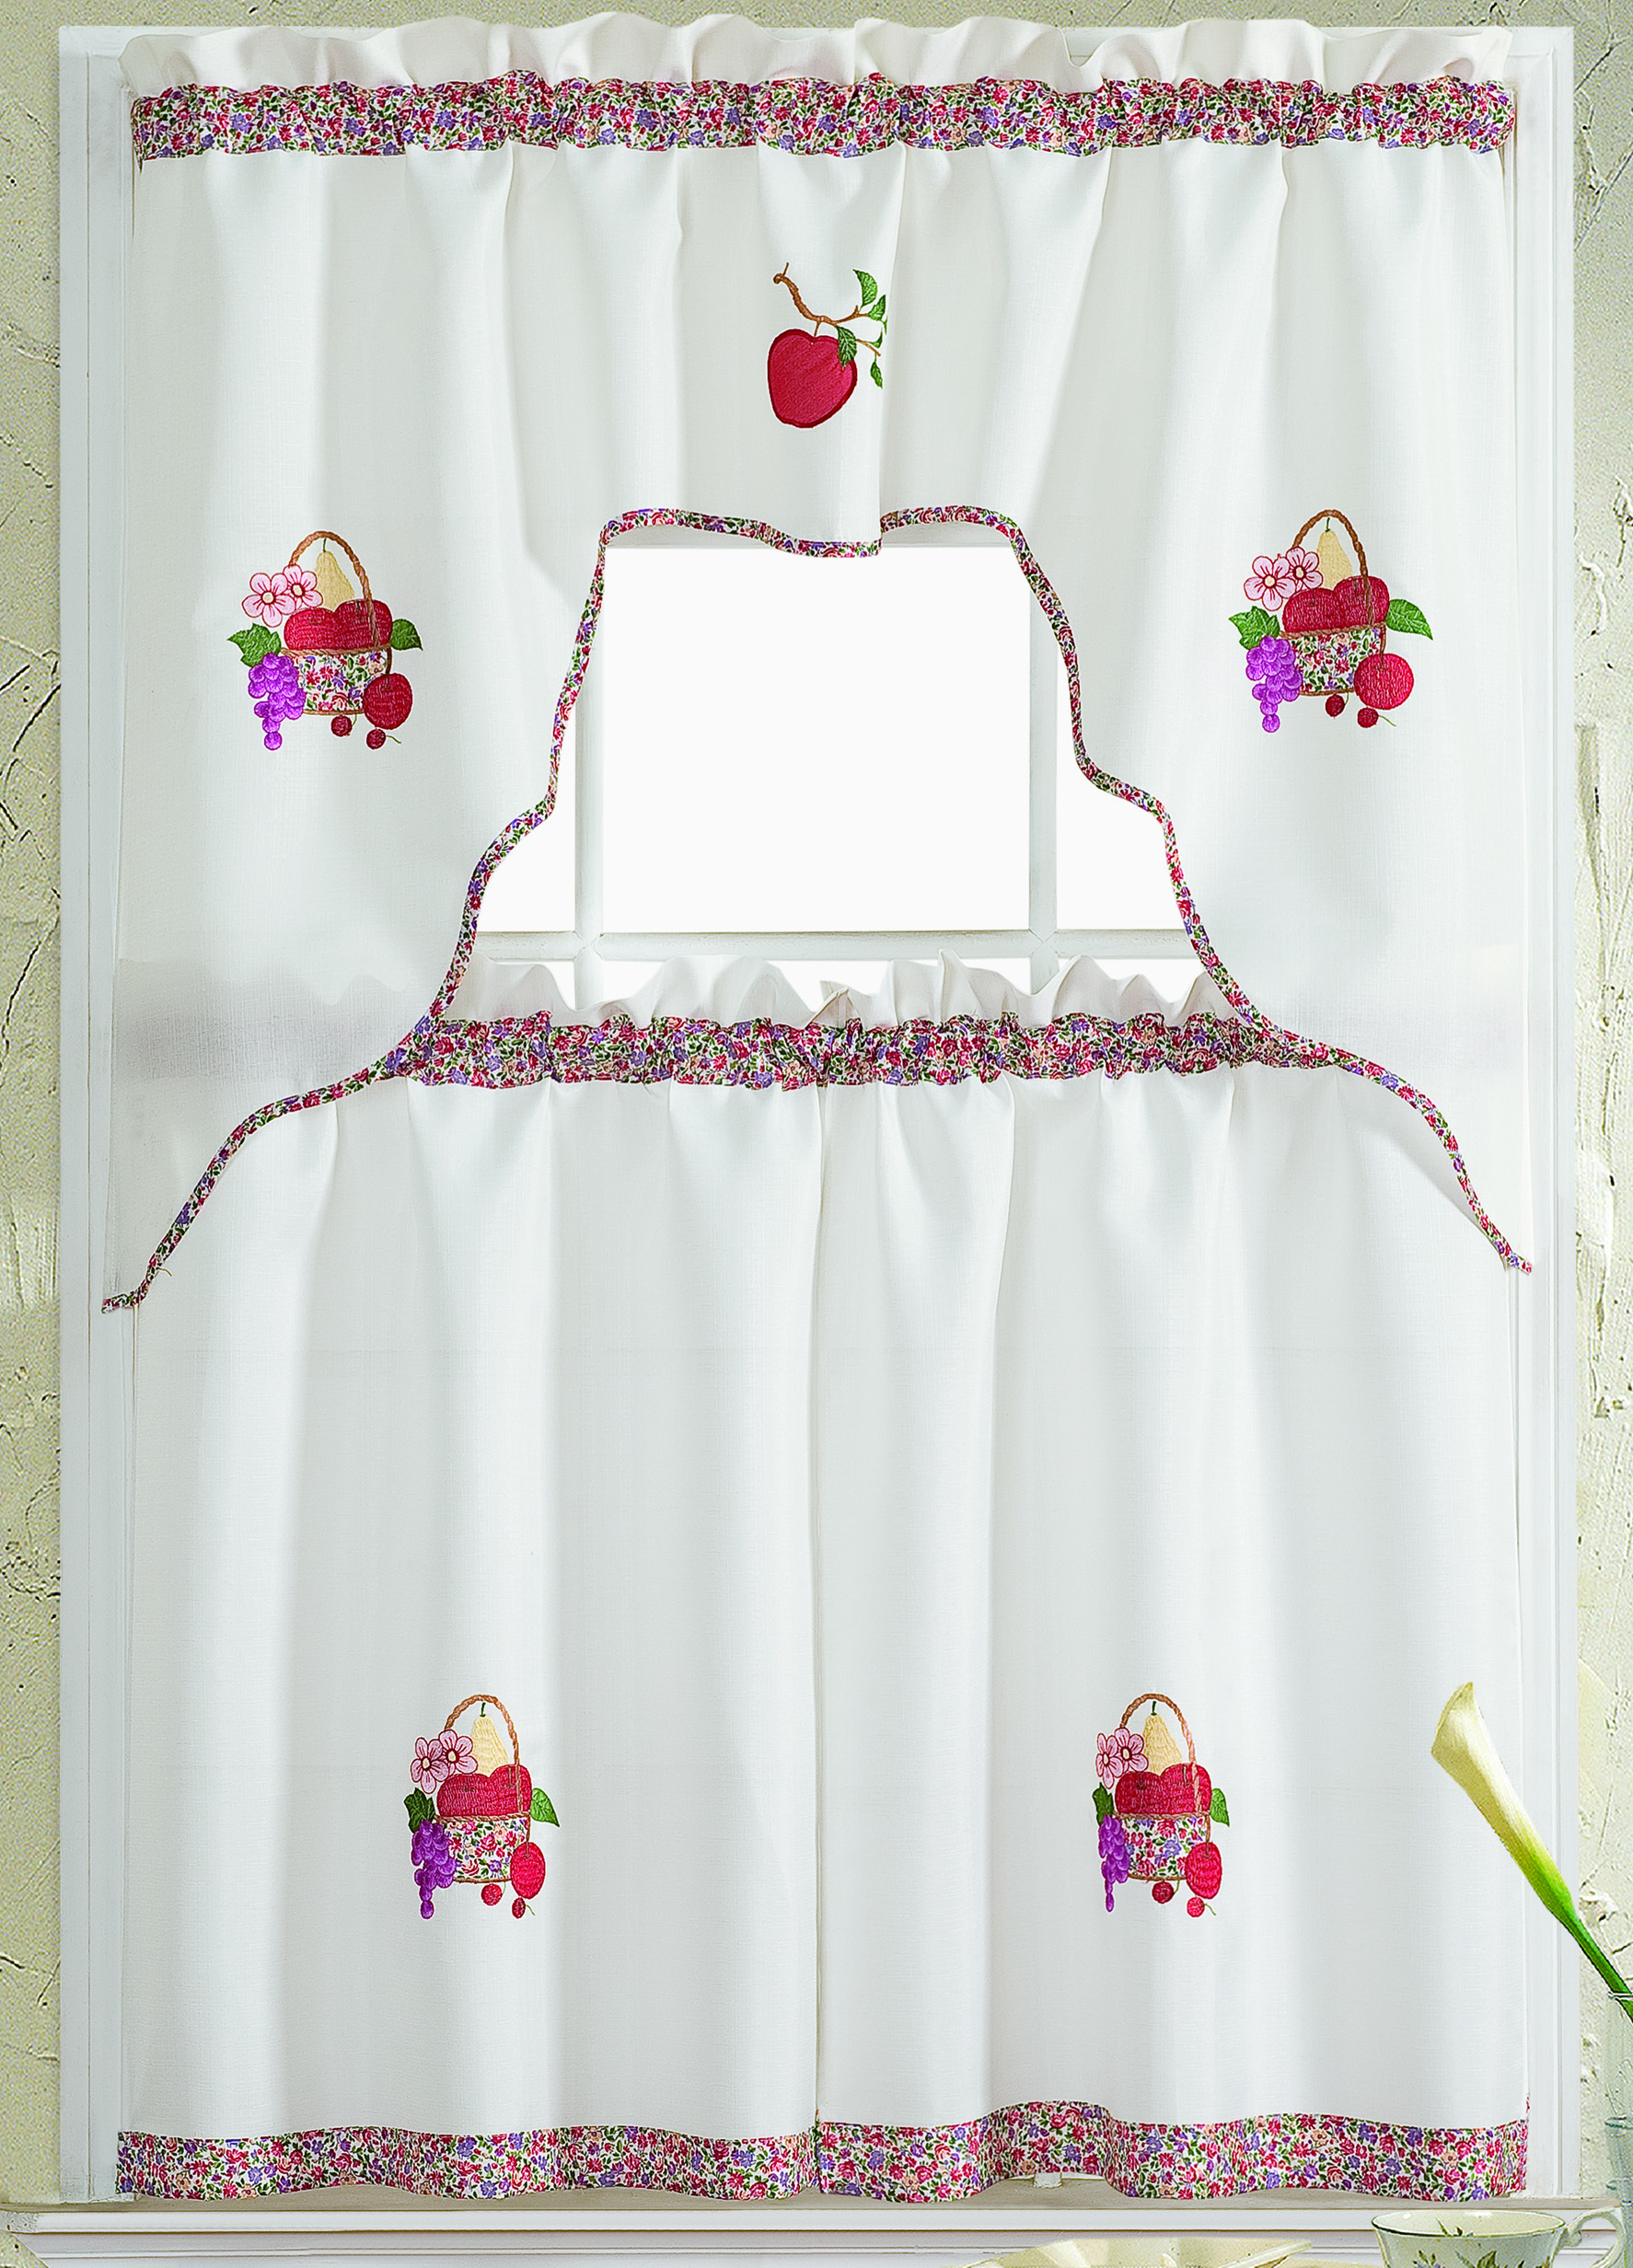 Grand Fruit Embroidered Kitchen Curtain